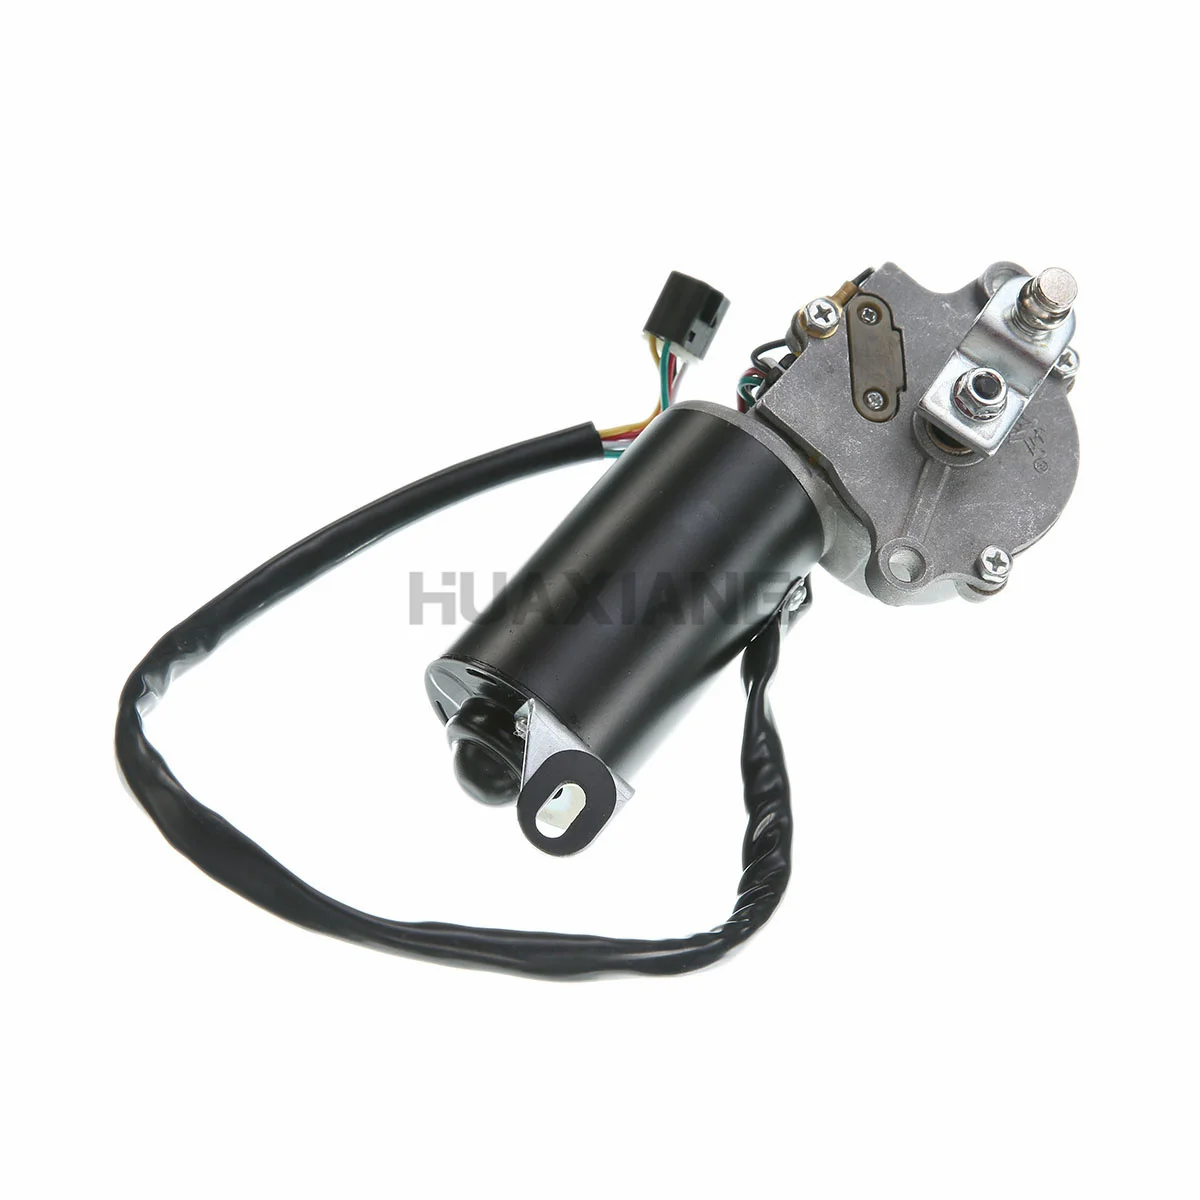 Cn Us Ca Gmr Front Windshield Wiper Motor For Jeep Wrangler Yj 87-95 40-432  85-432 56030005 849100-2178 - Buy Wiper Motor Product on 